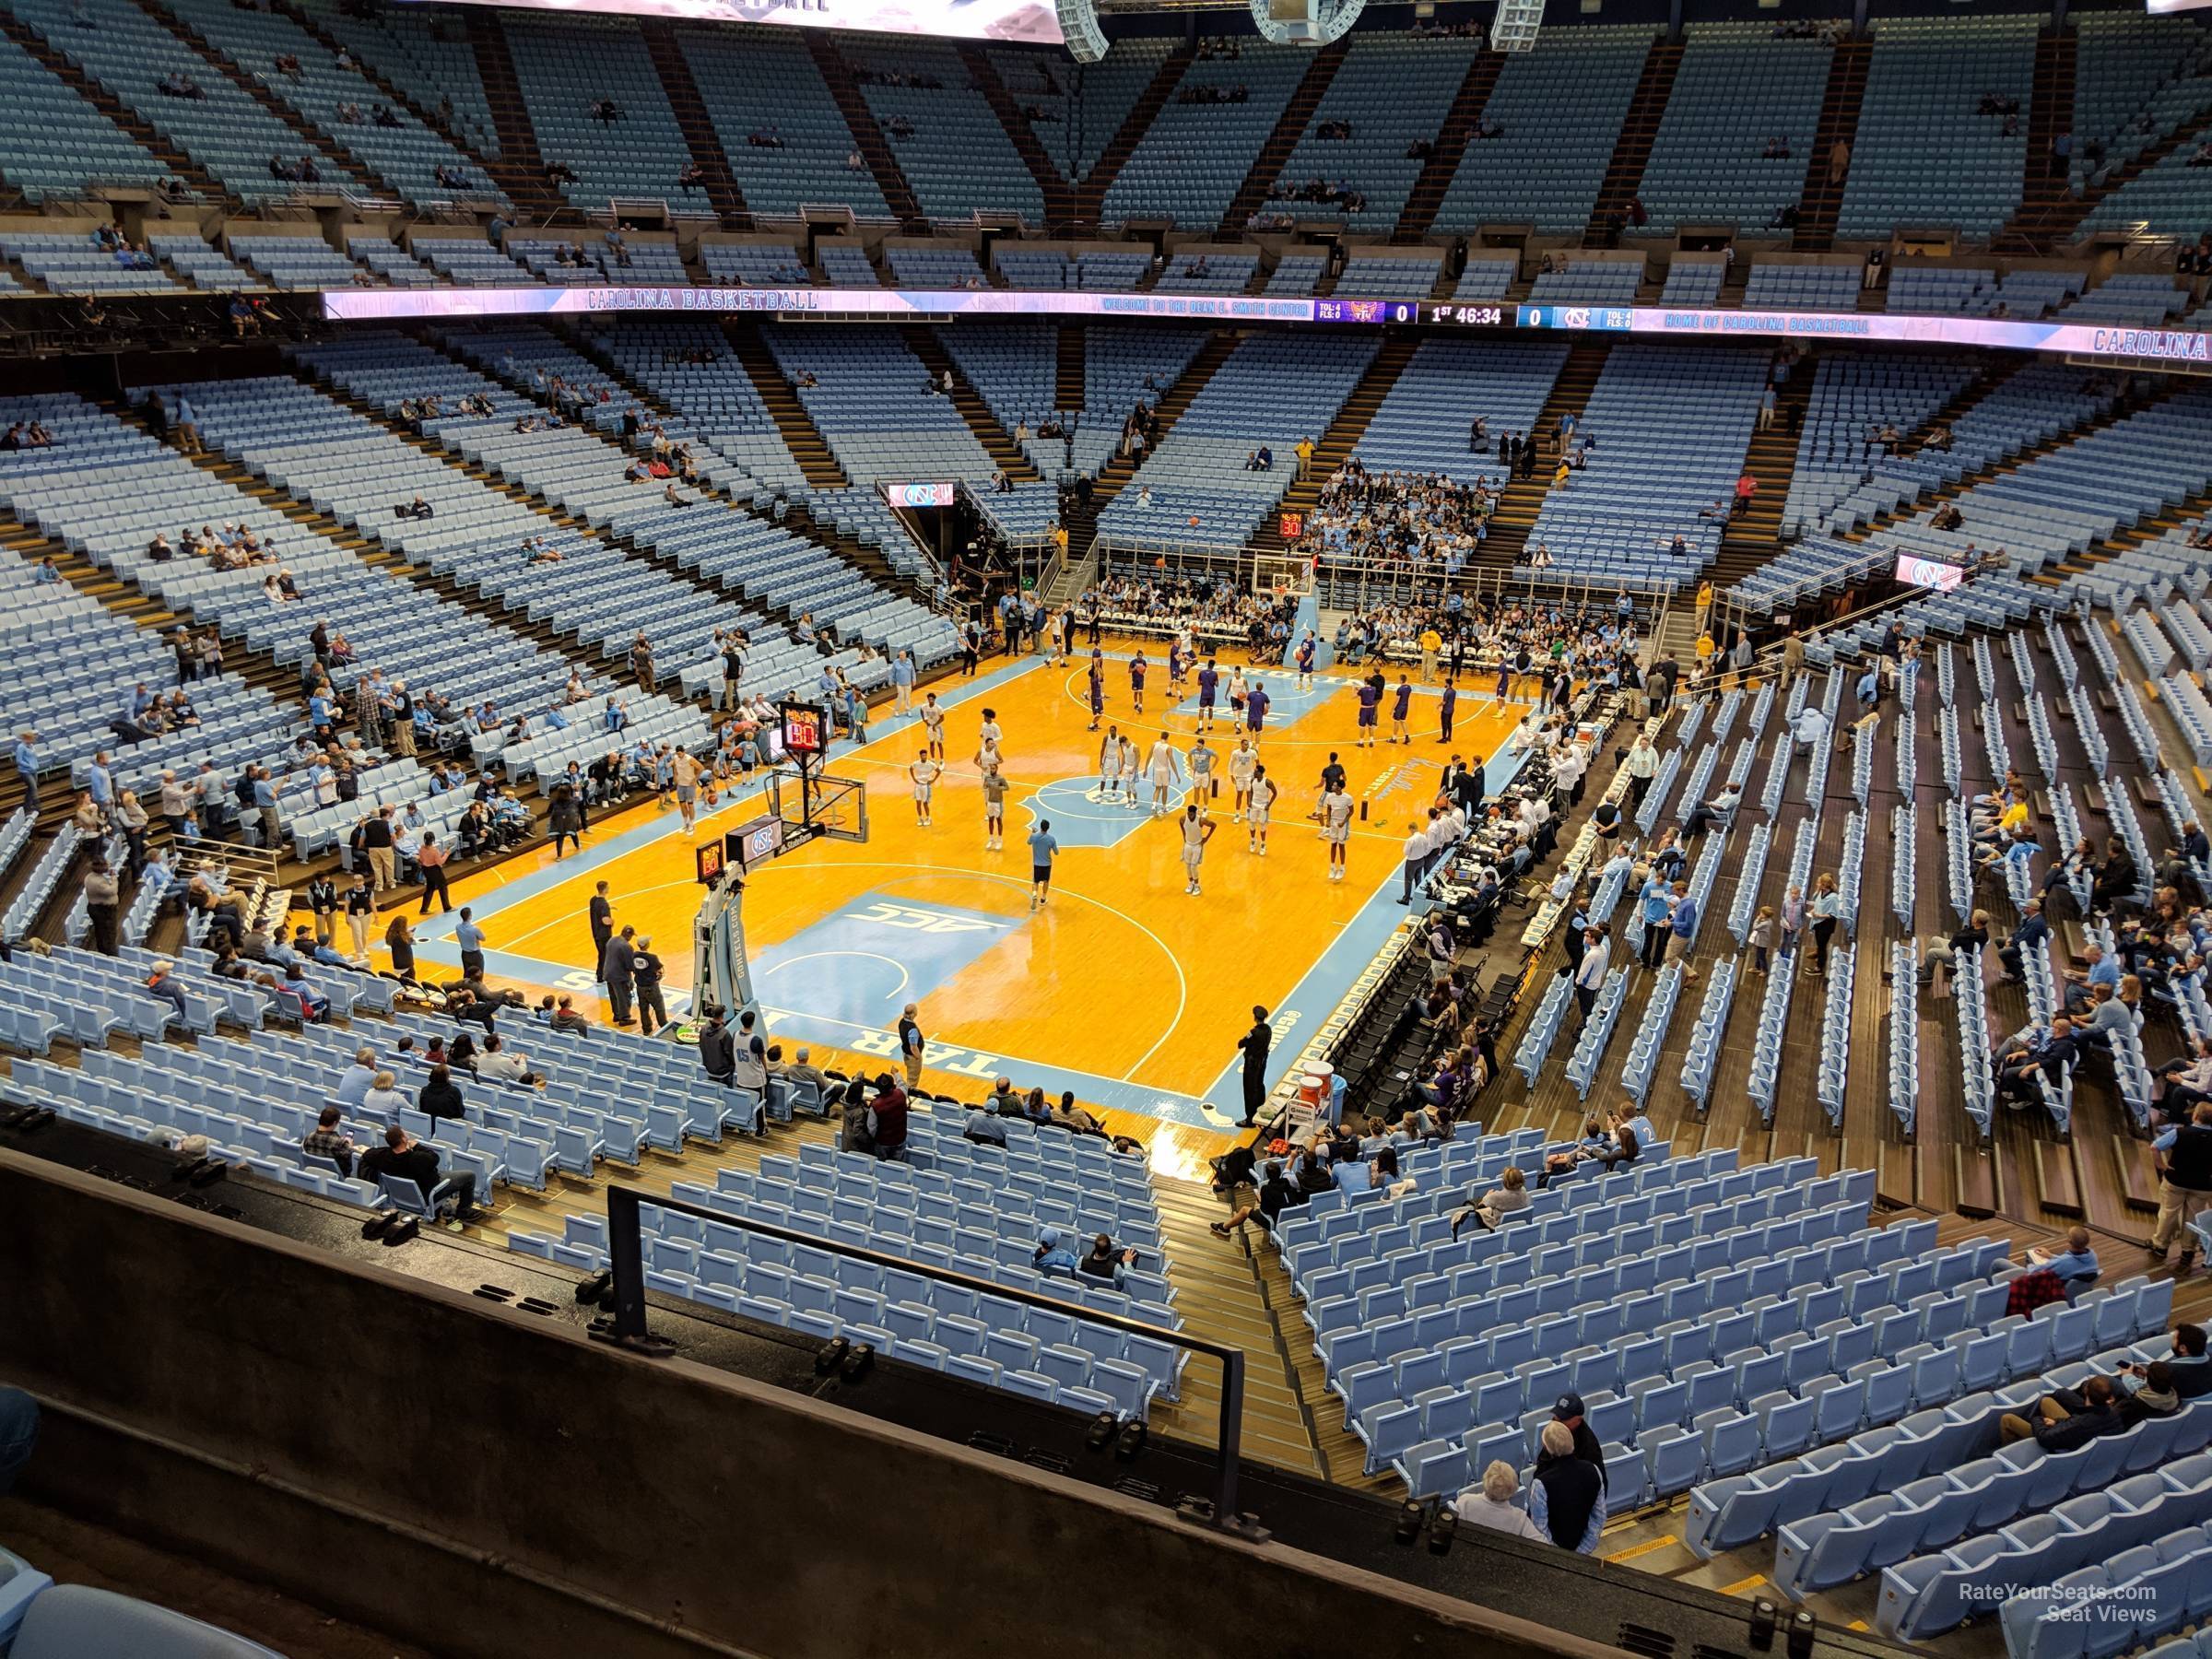 section 202, row c seat view  - dean smith center